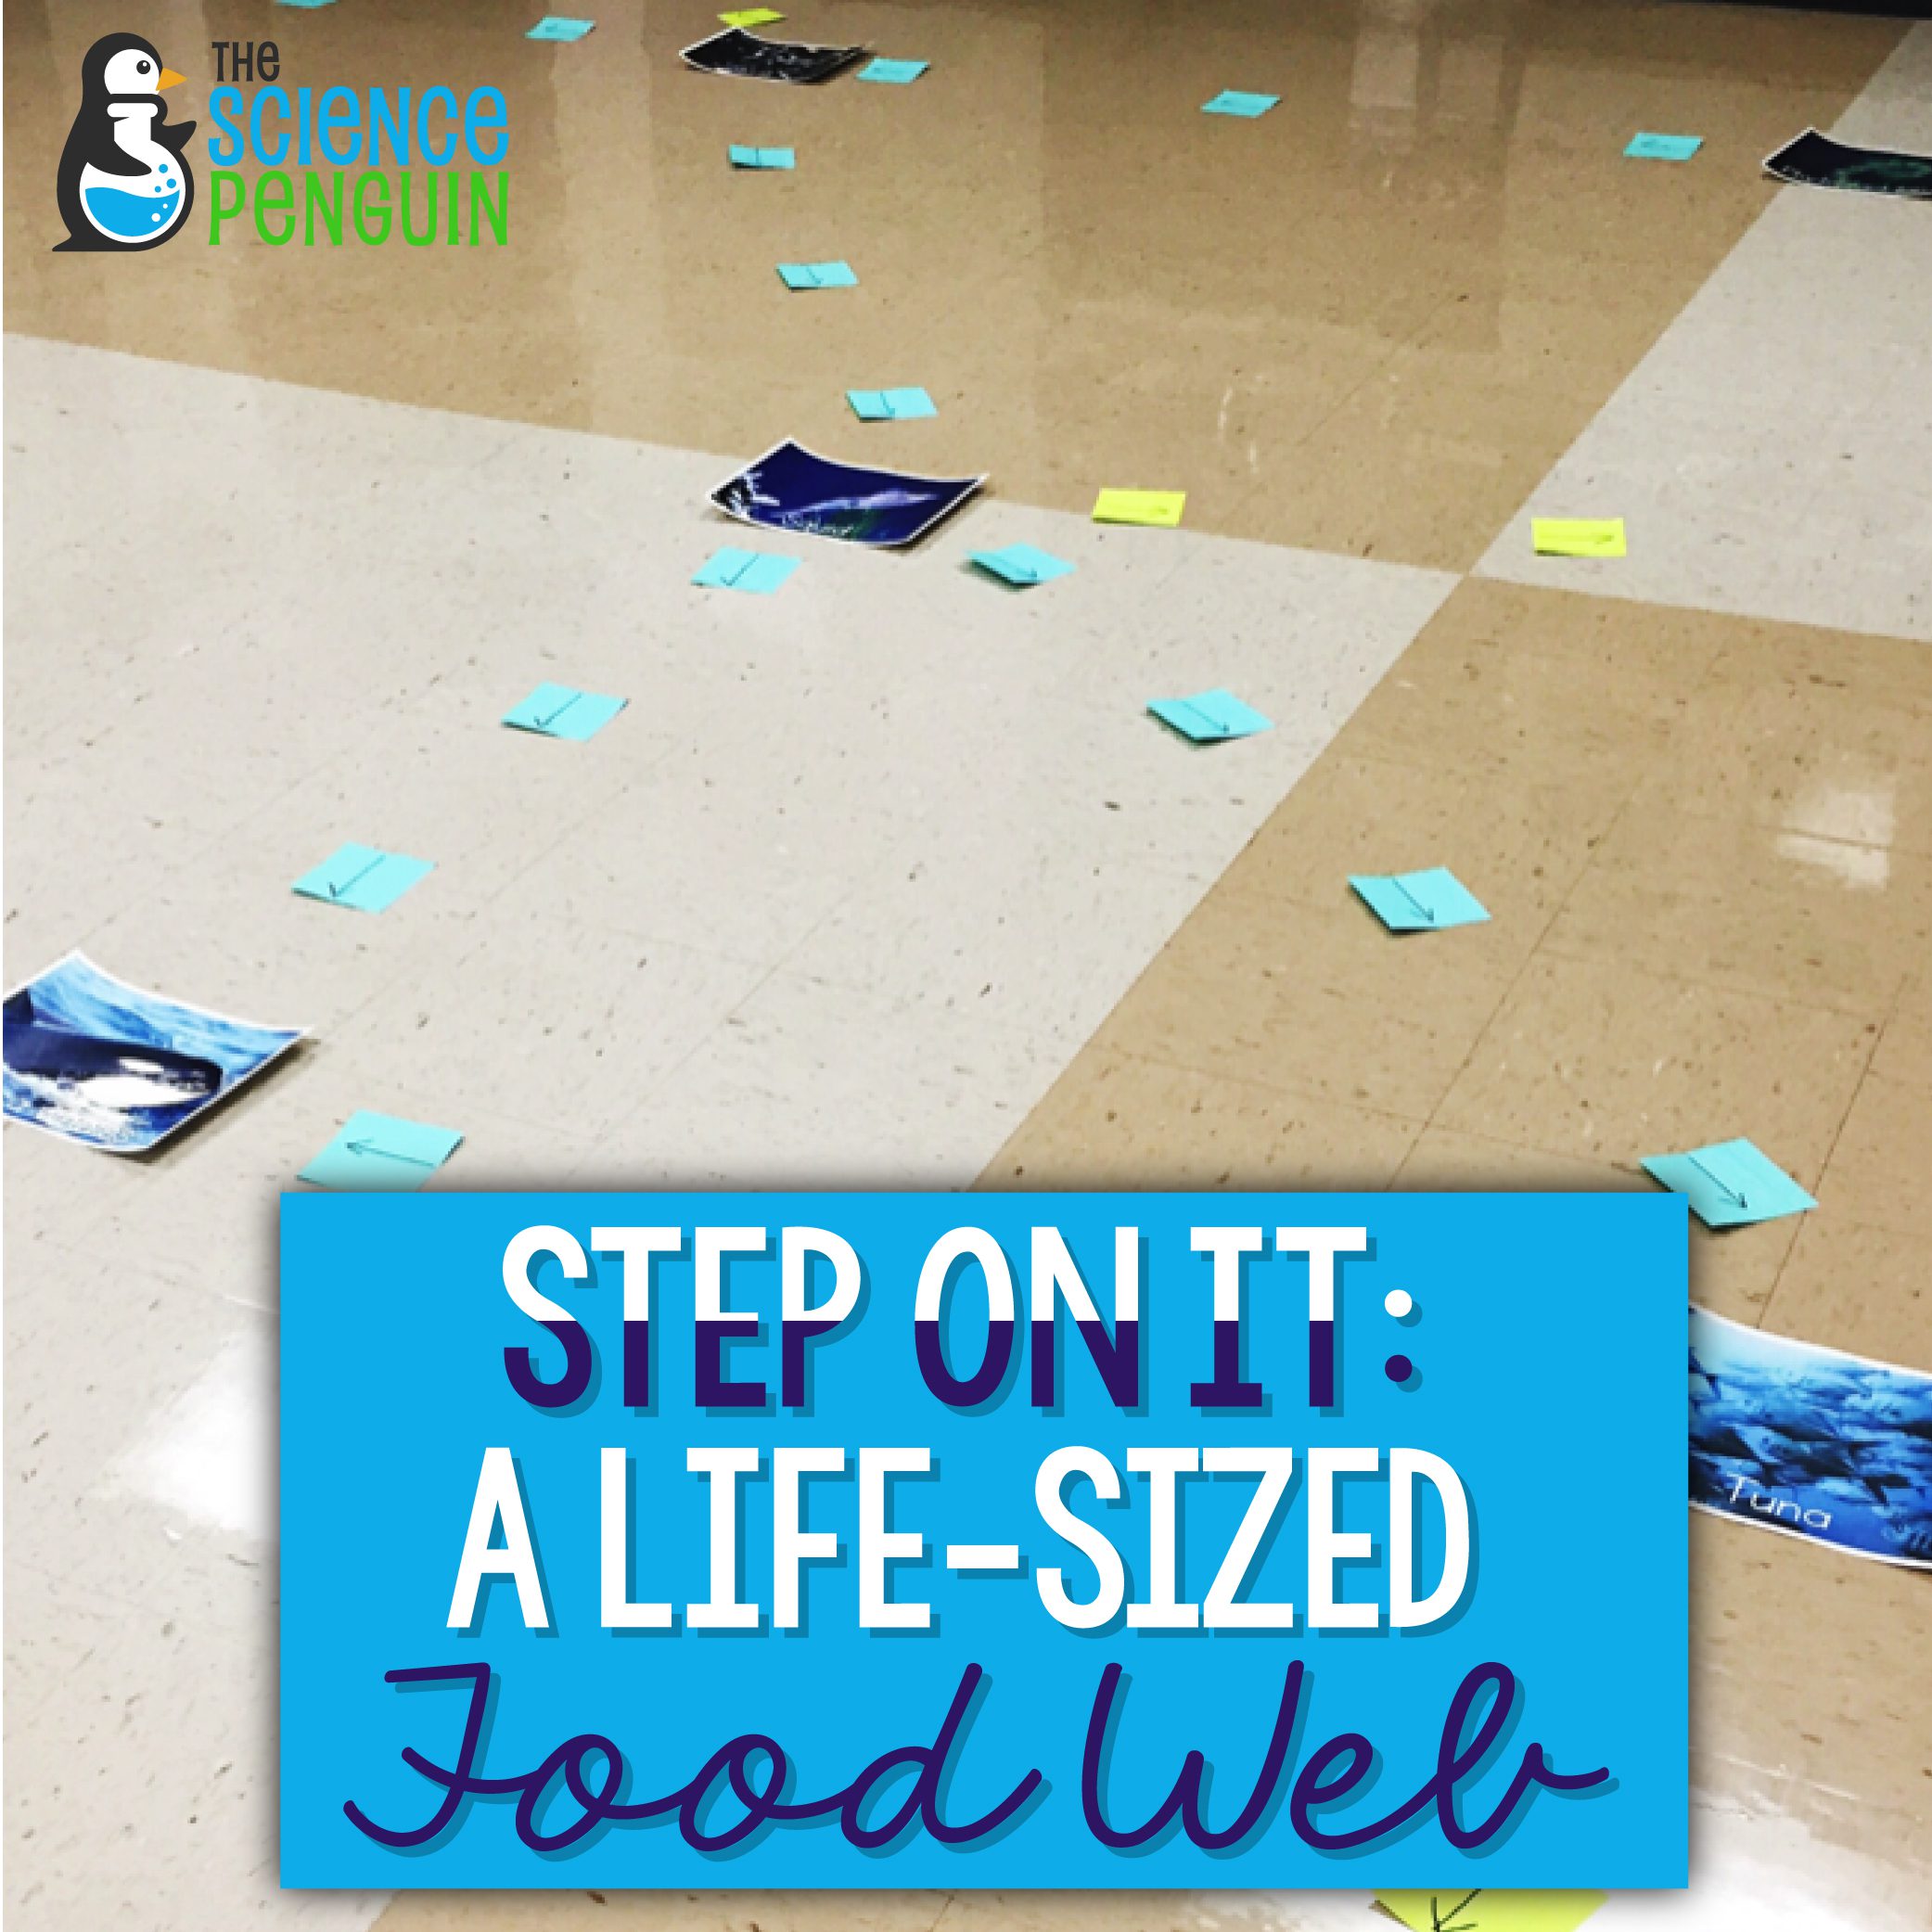 Step on it! A life-sized food web — The Science Penguin